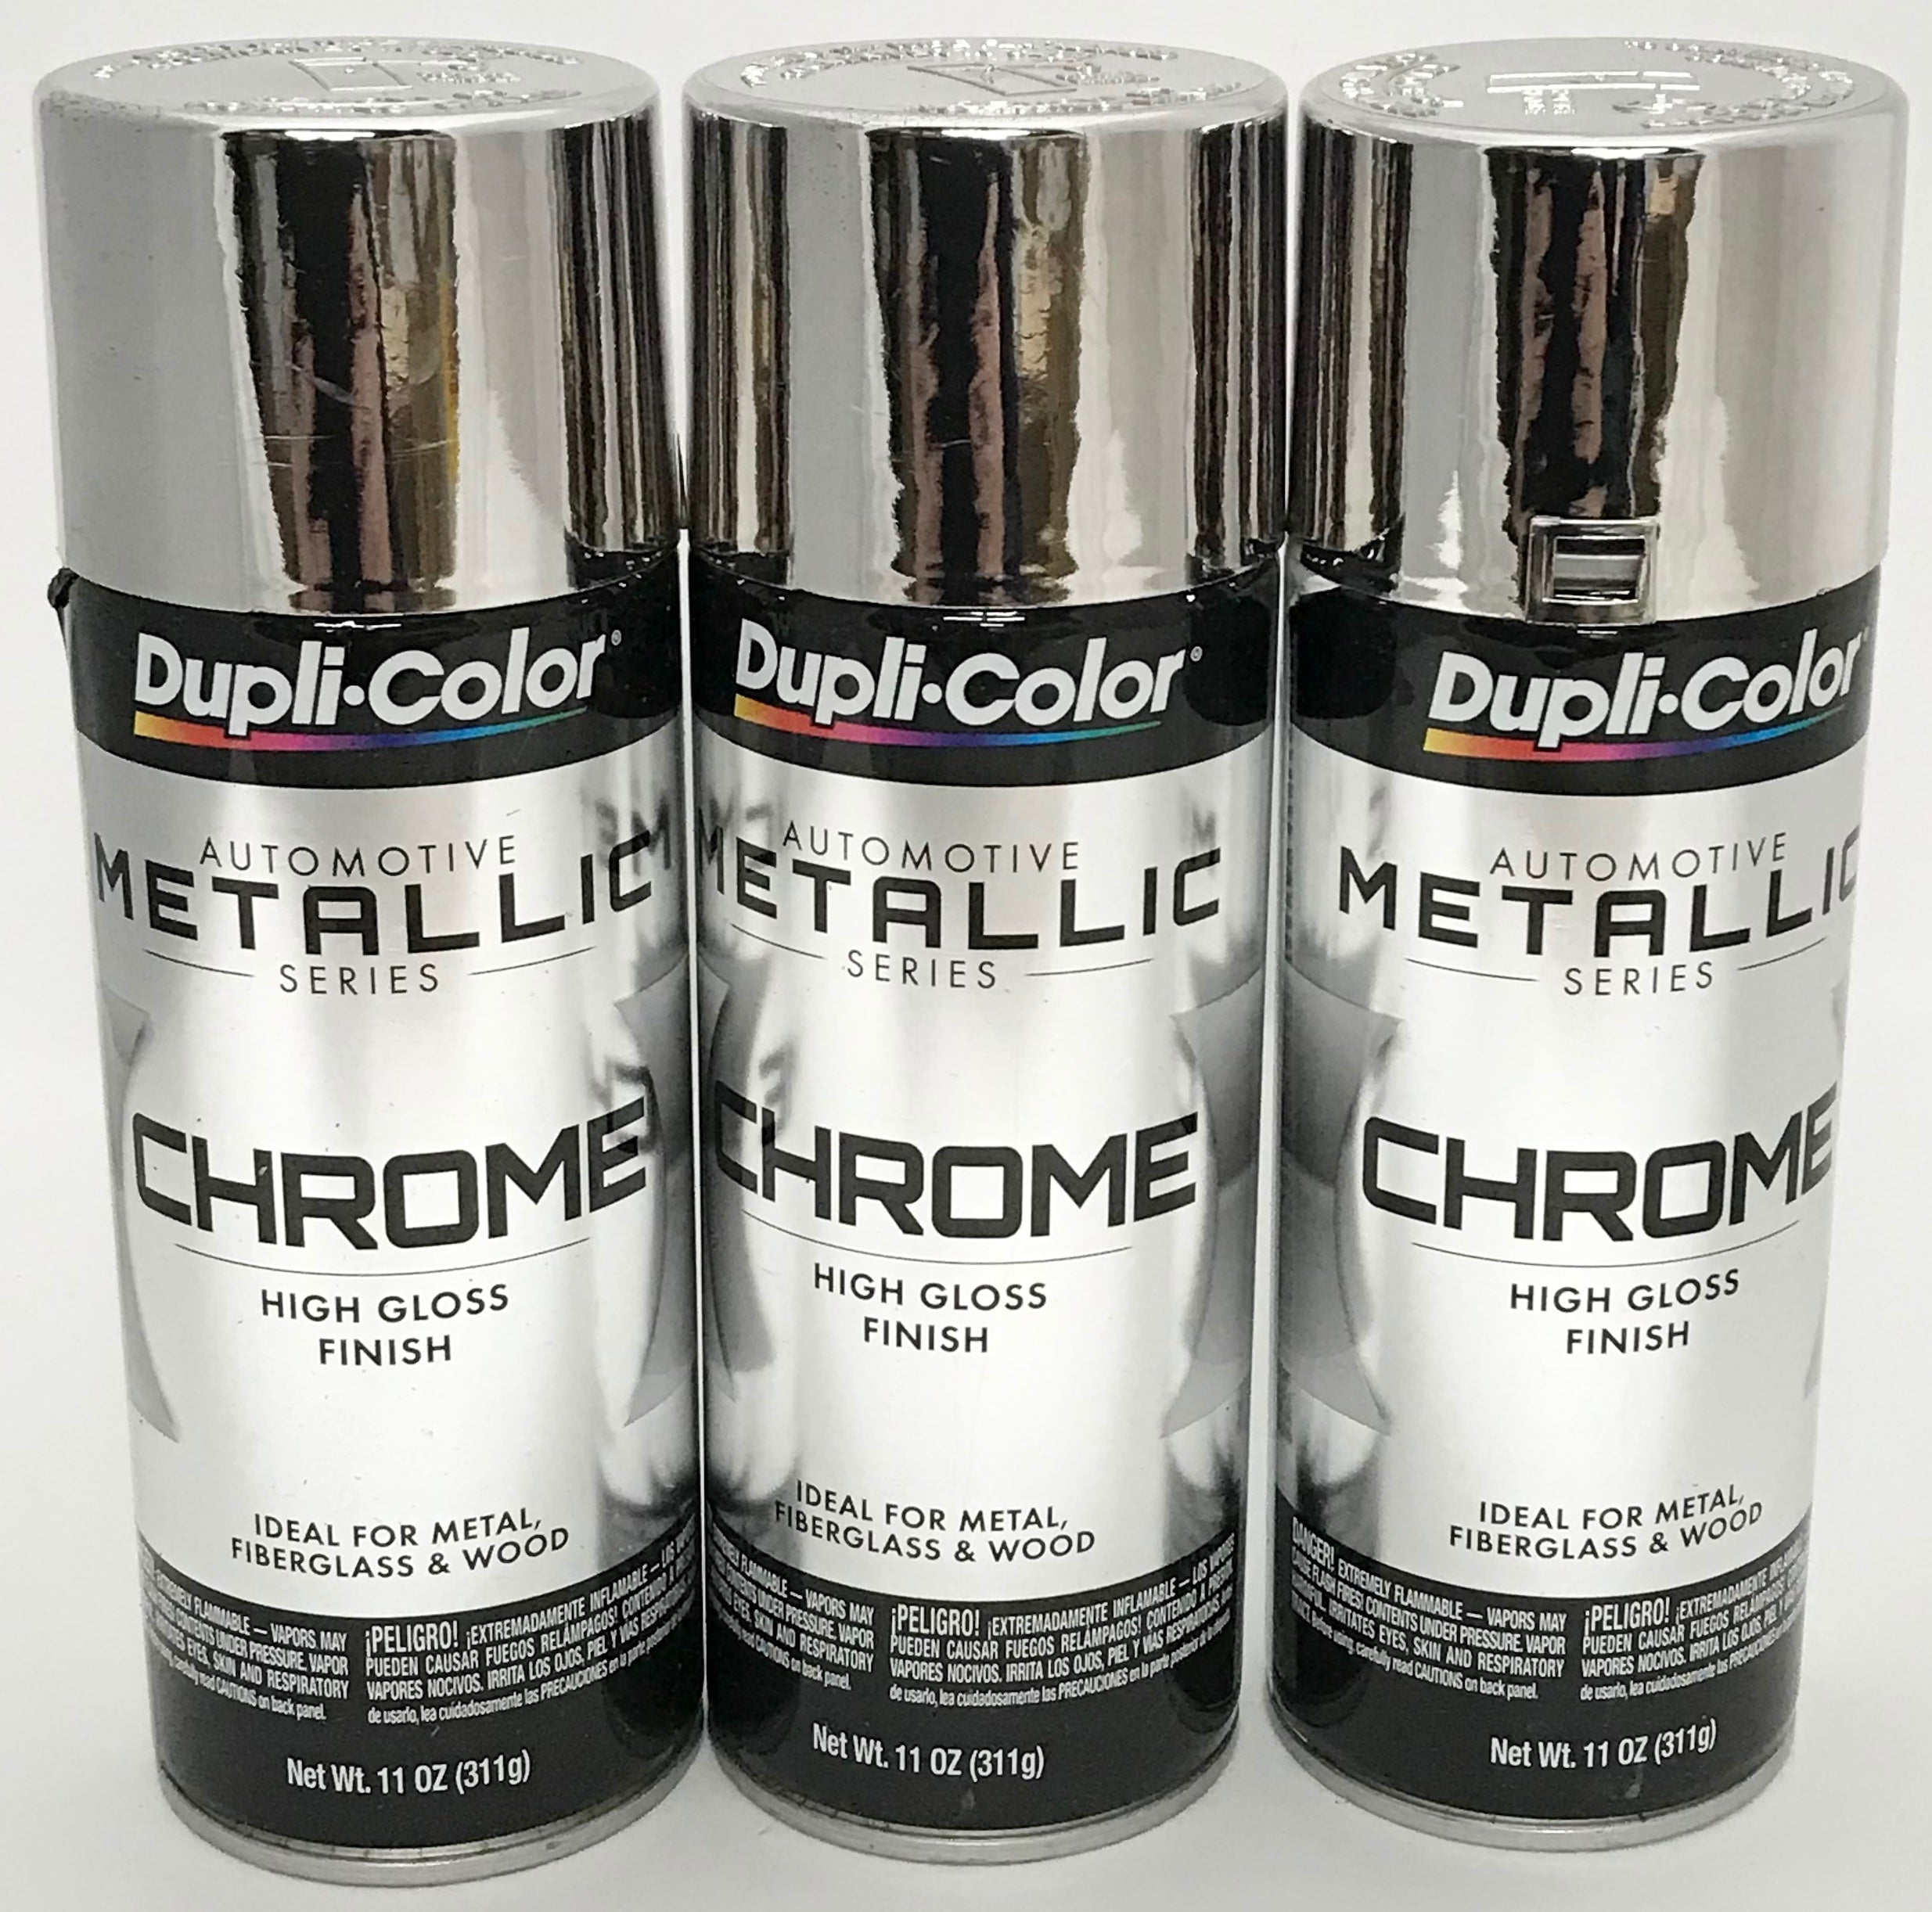 How to approximate chrome paint finish?